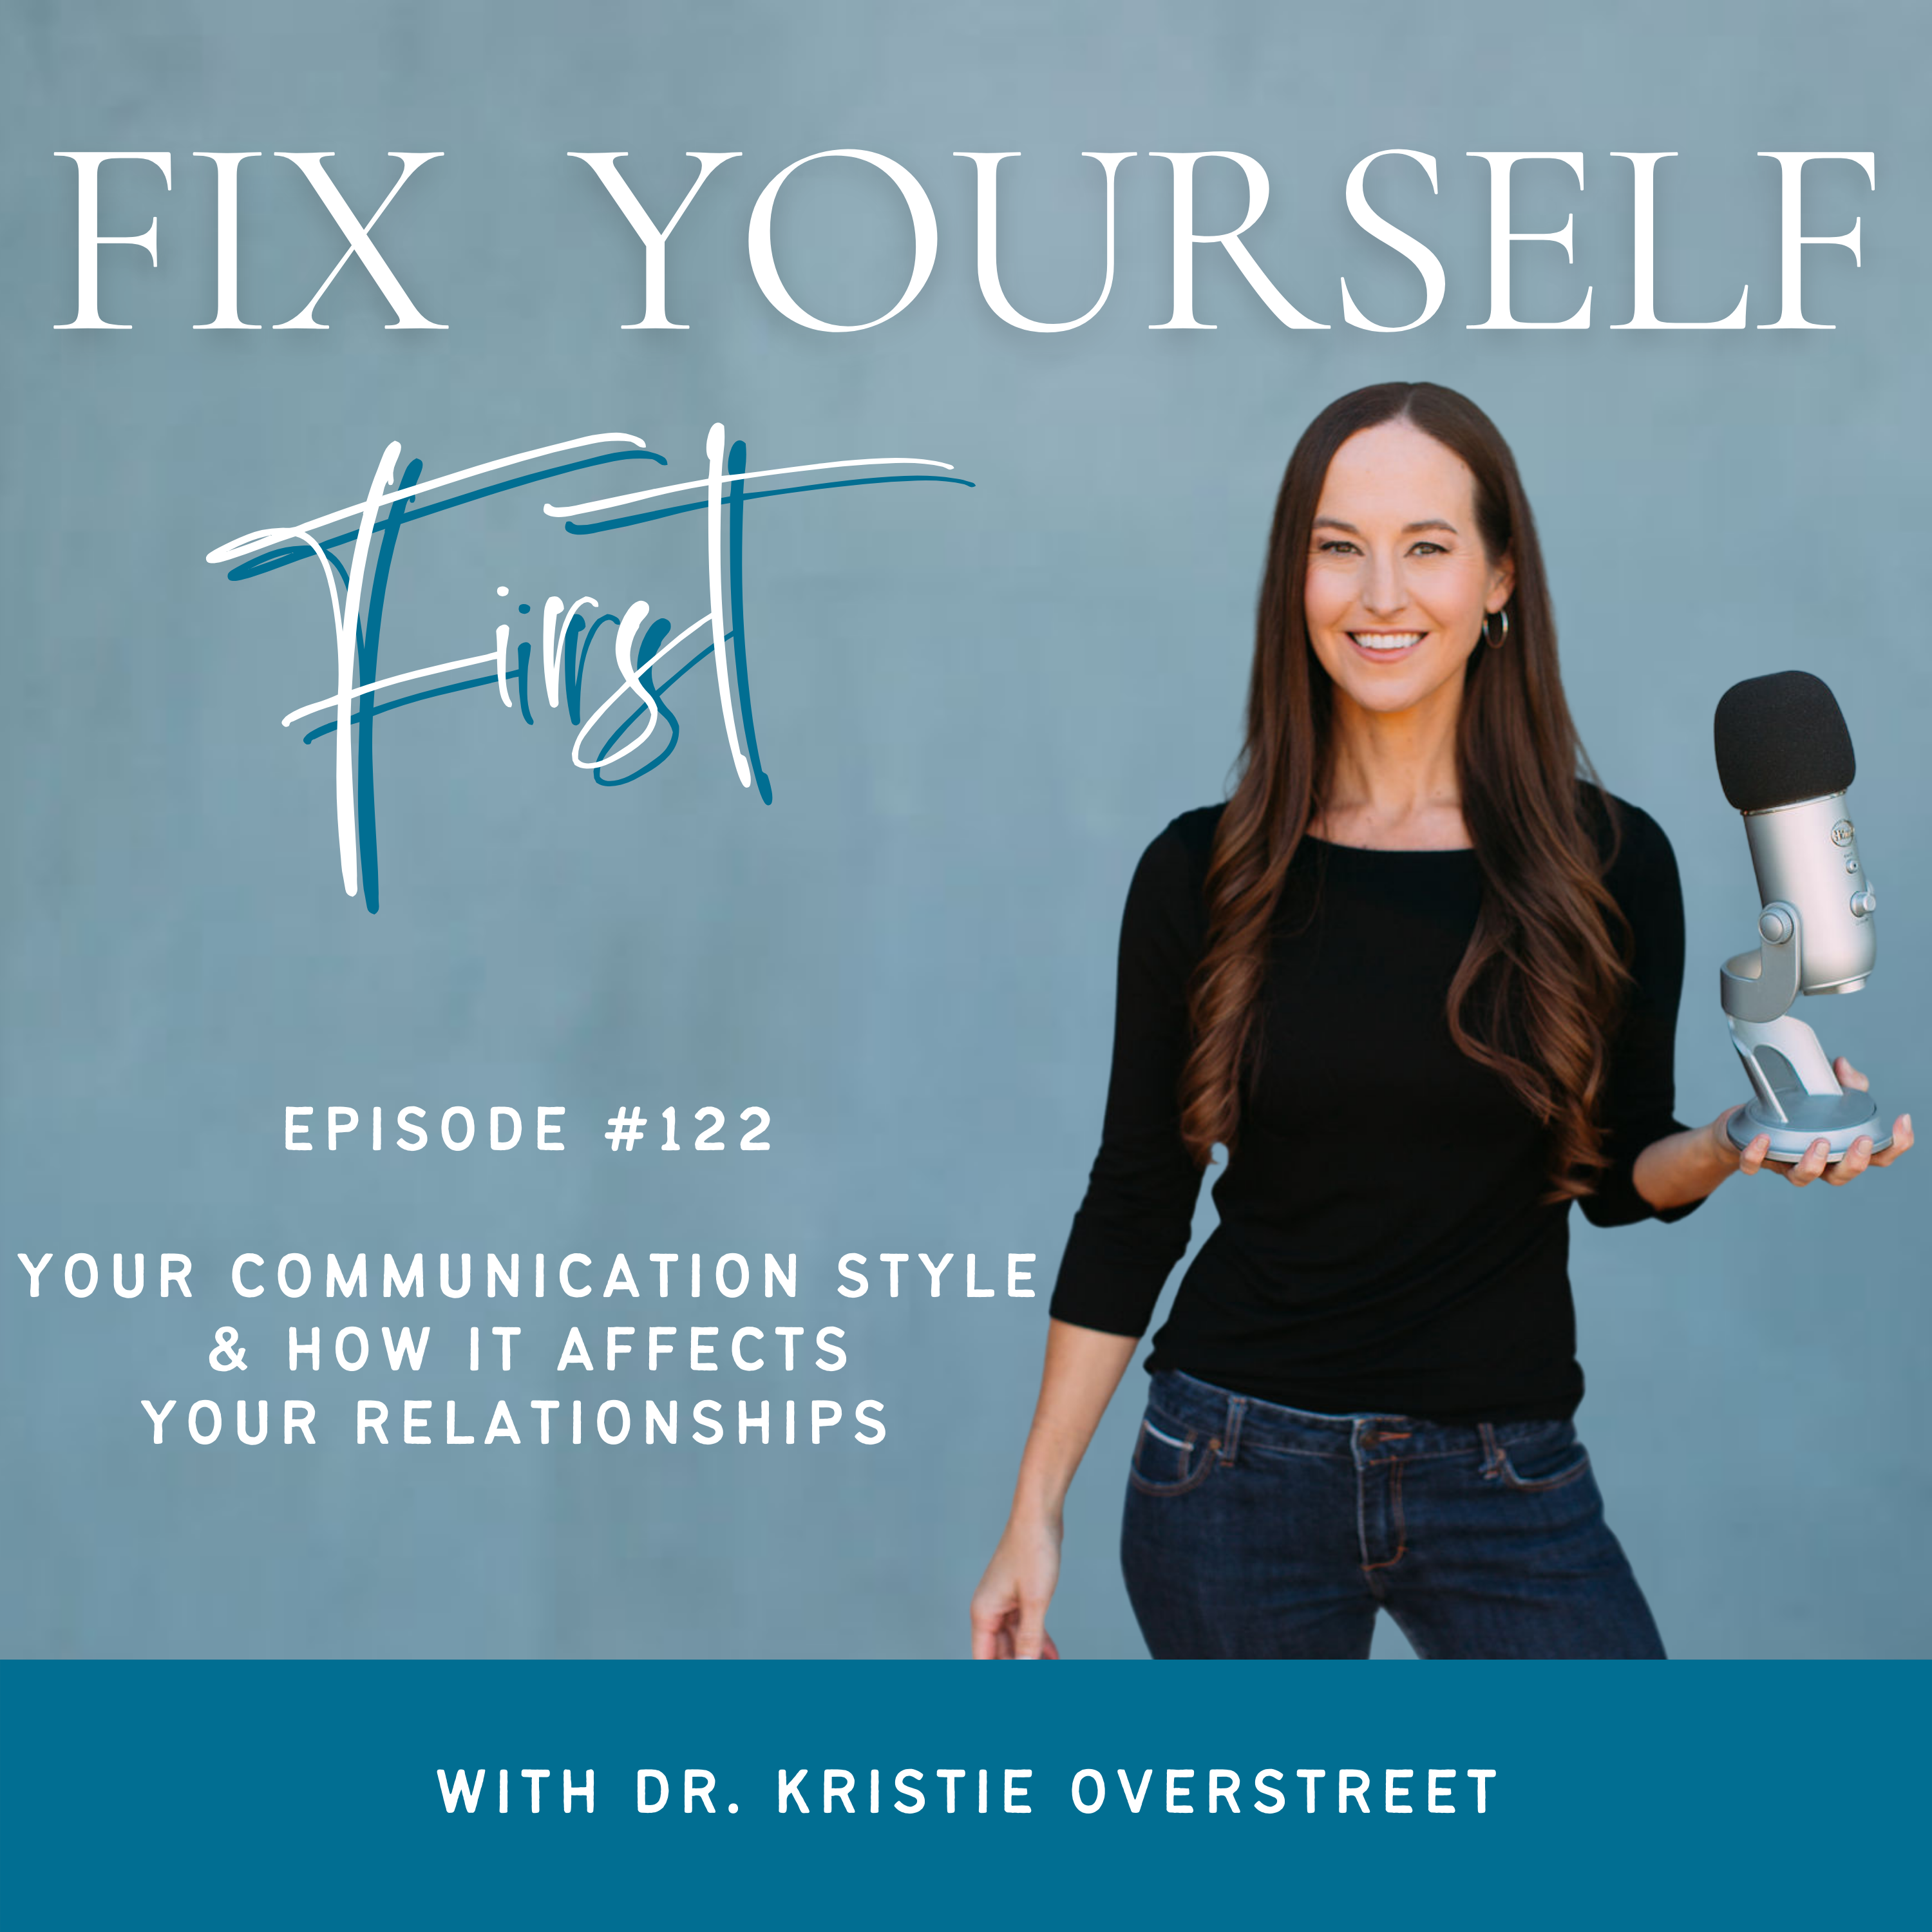 Fix Yourself First Episode 122 Your Communication Style & How It Affects Your Relationships